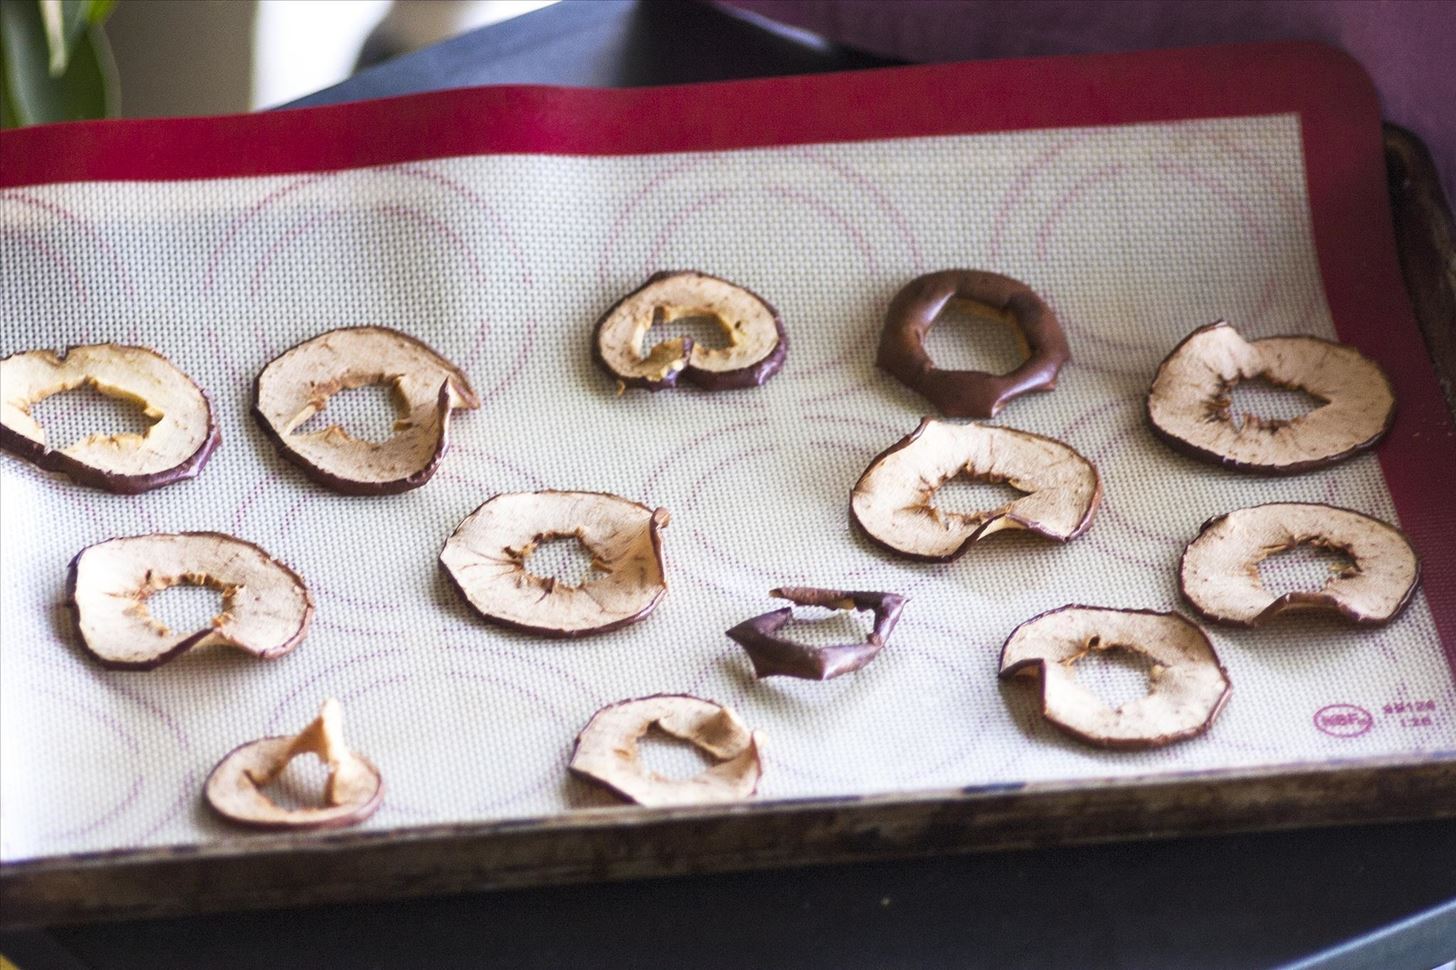 How to Dehydrate Food Without a Dehydrator